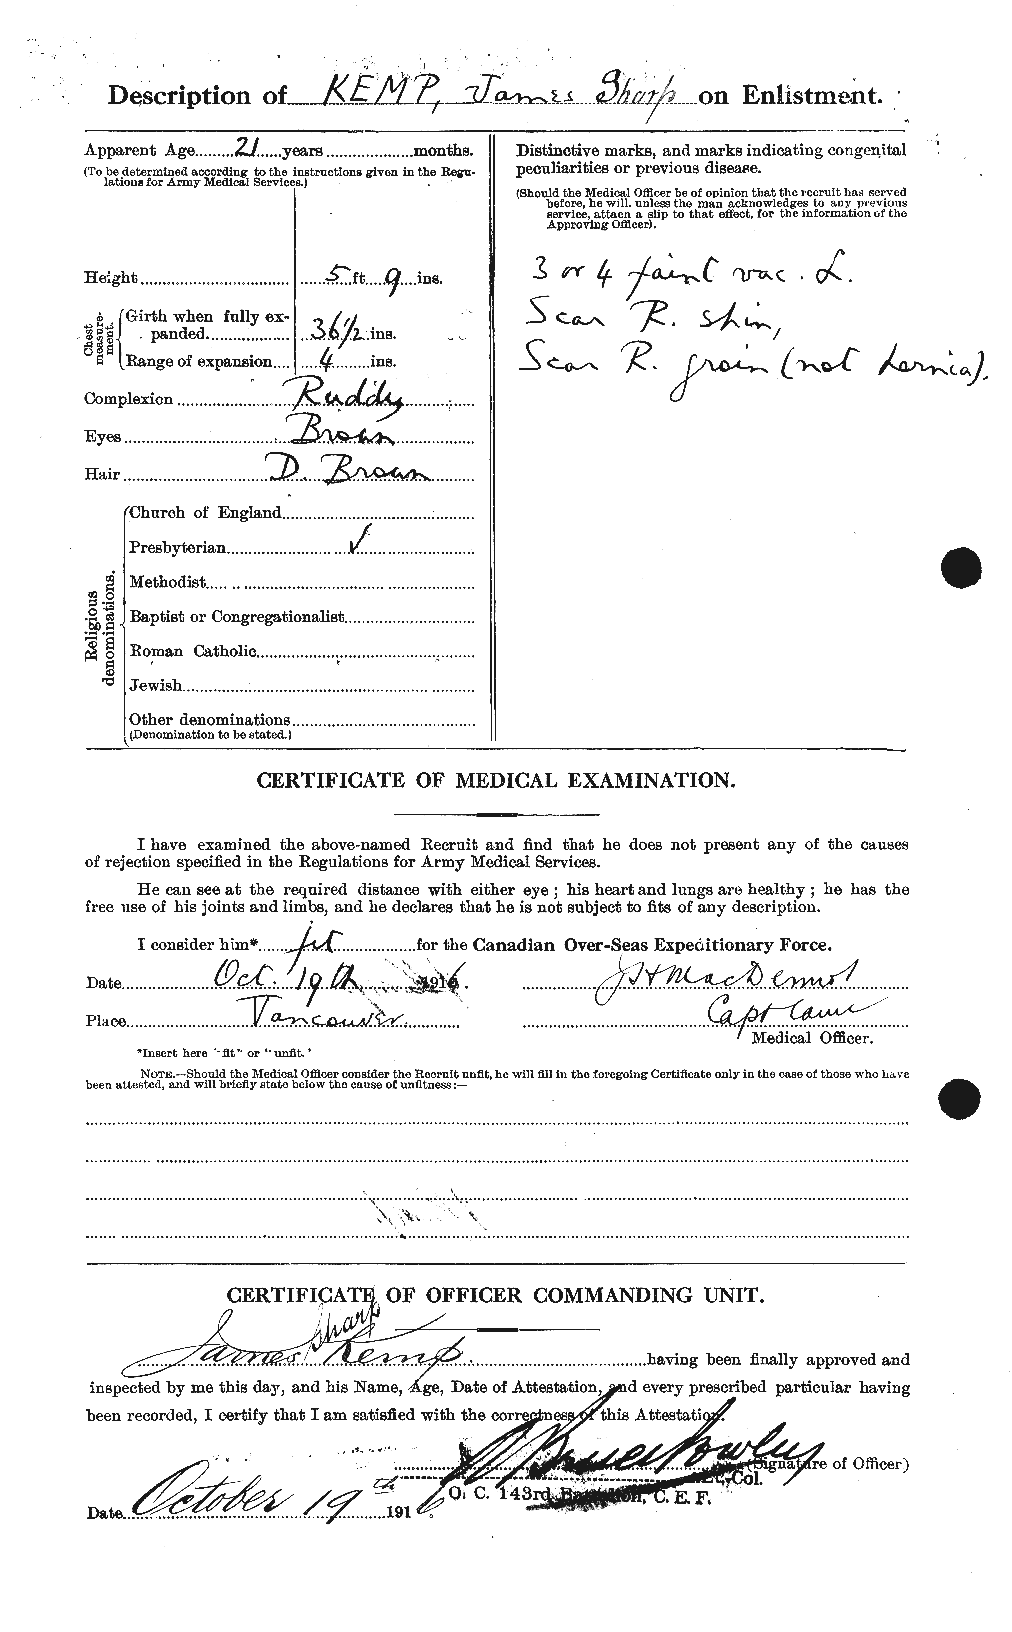 Personnel Records of the First World War - CEF 433355b